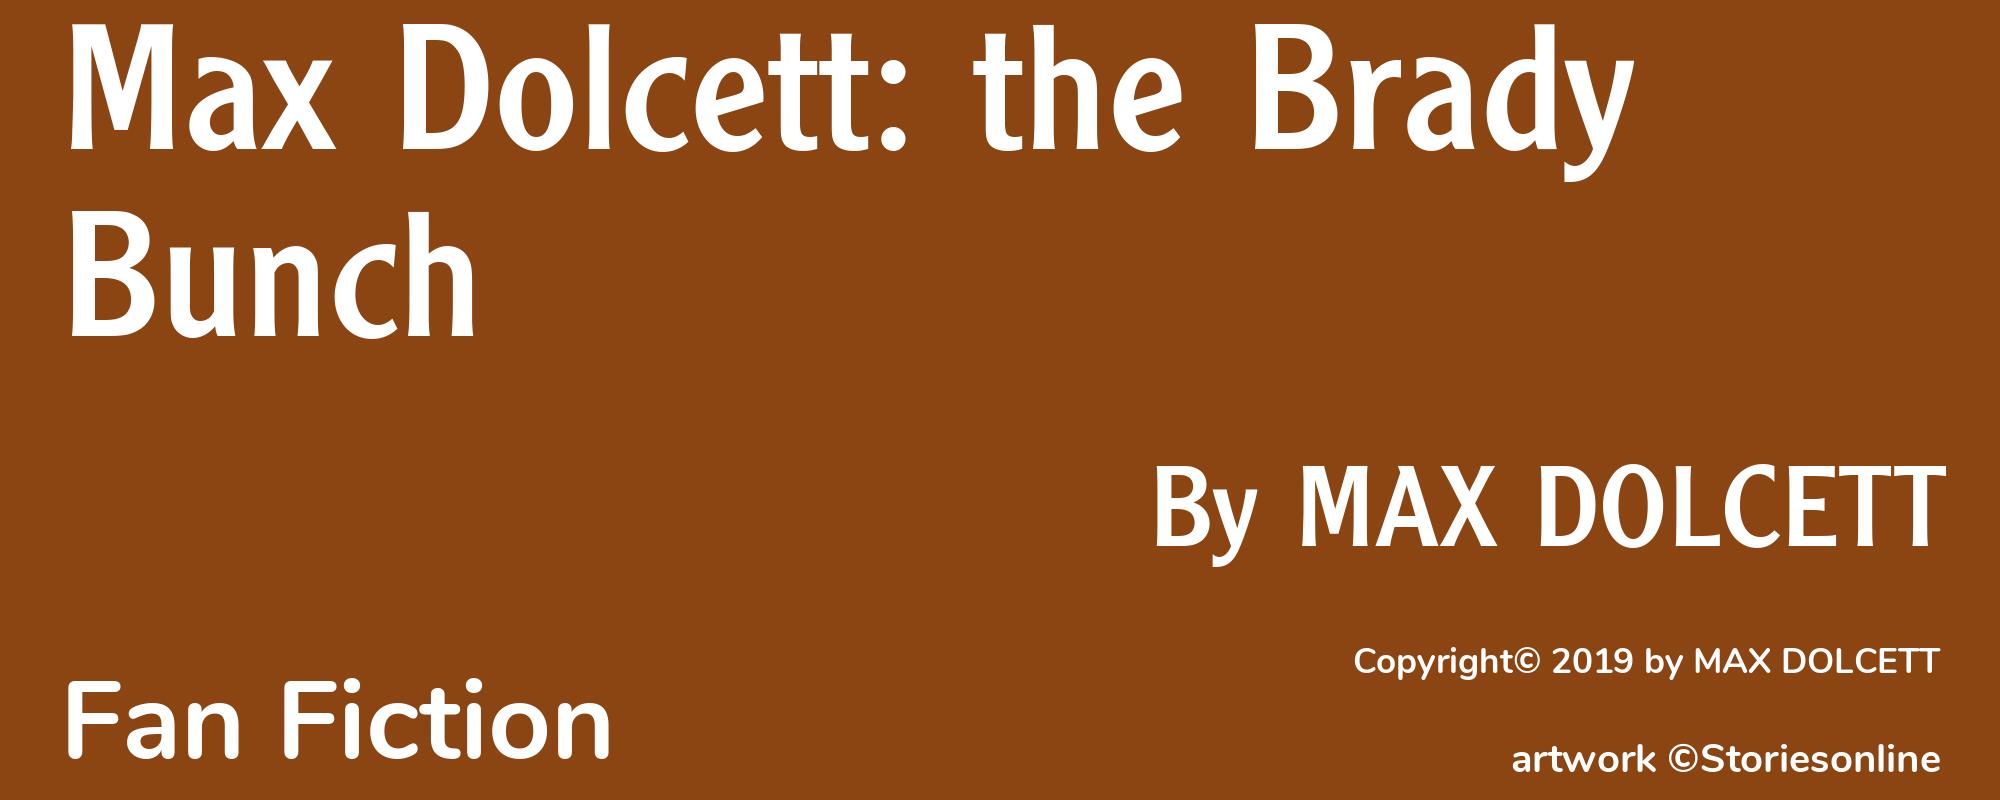 Max Dolcett: the Brady Bunch - Cover